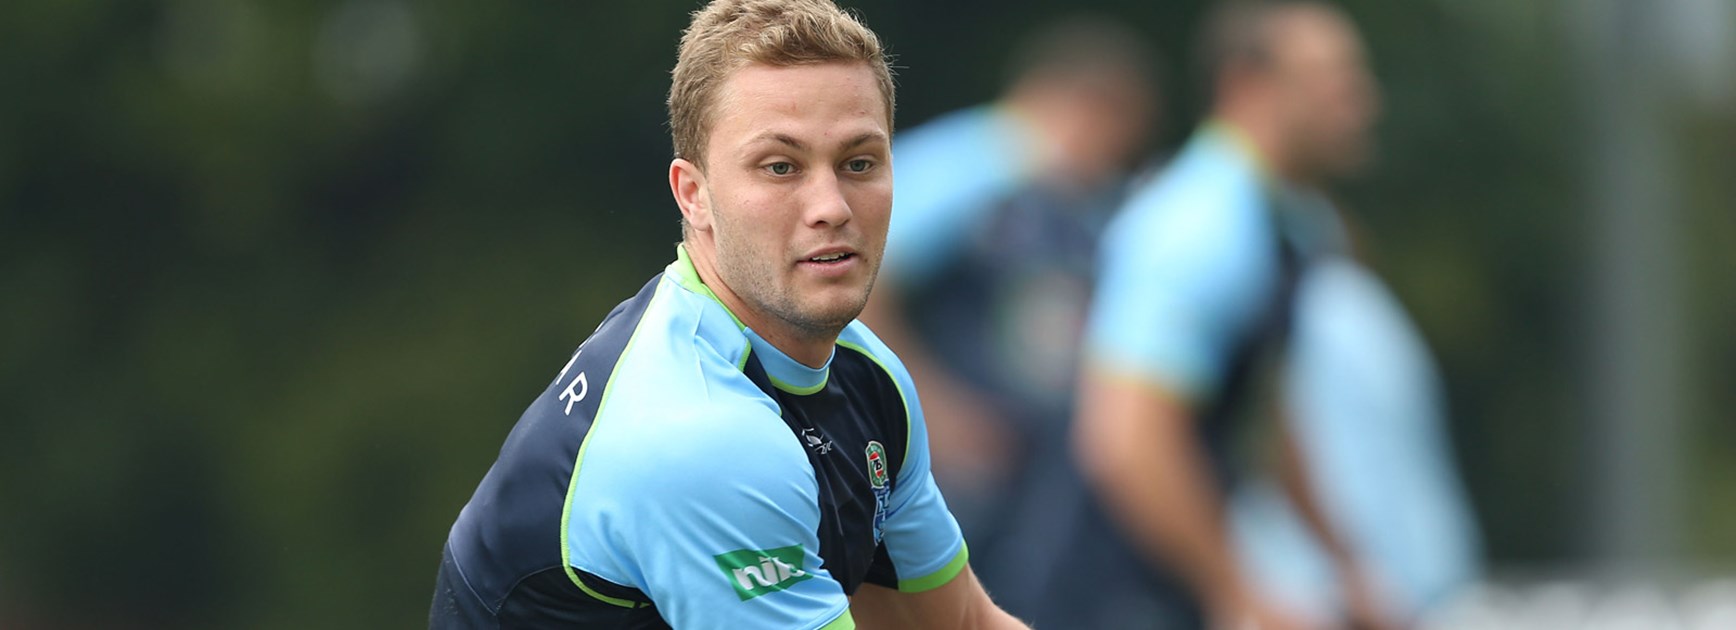 NSW fullback Matt Moylan in training in the lead up to Game One of the 2016 series.